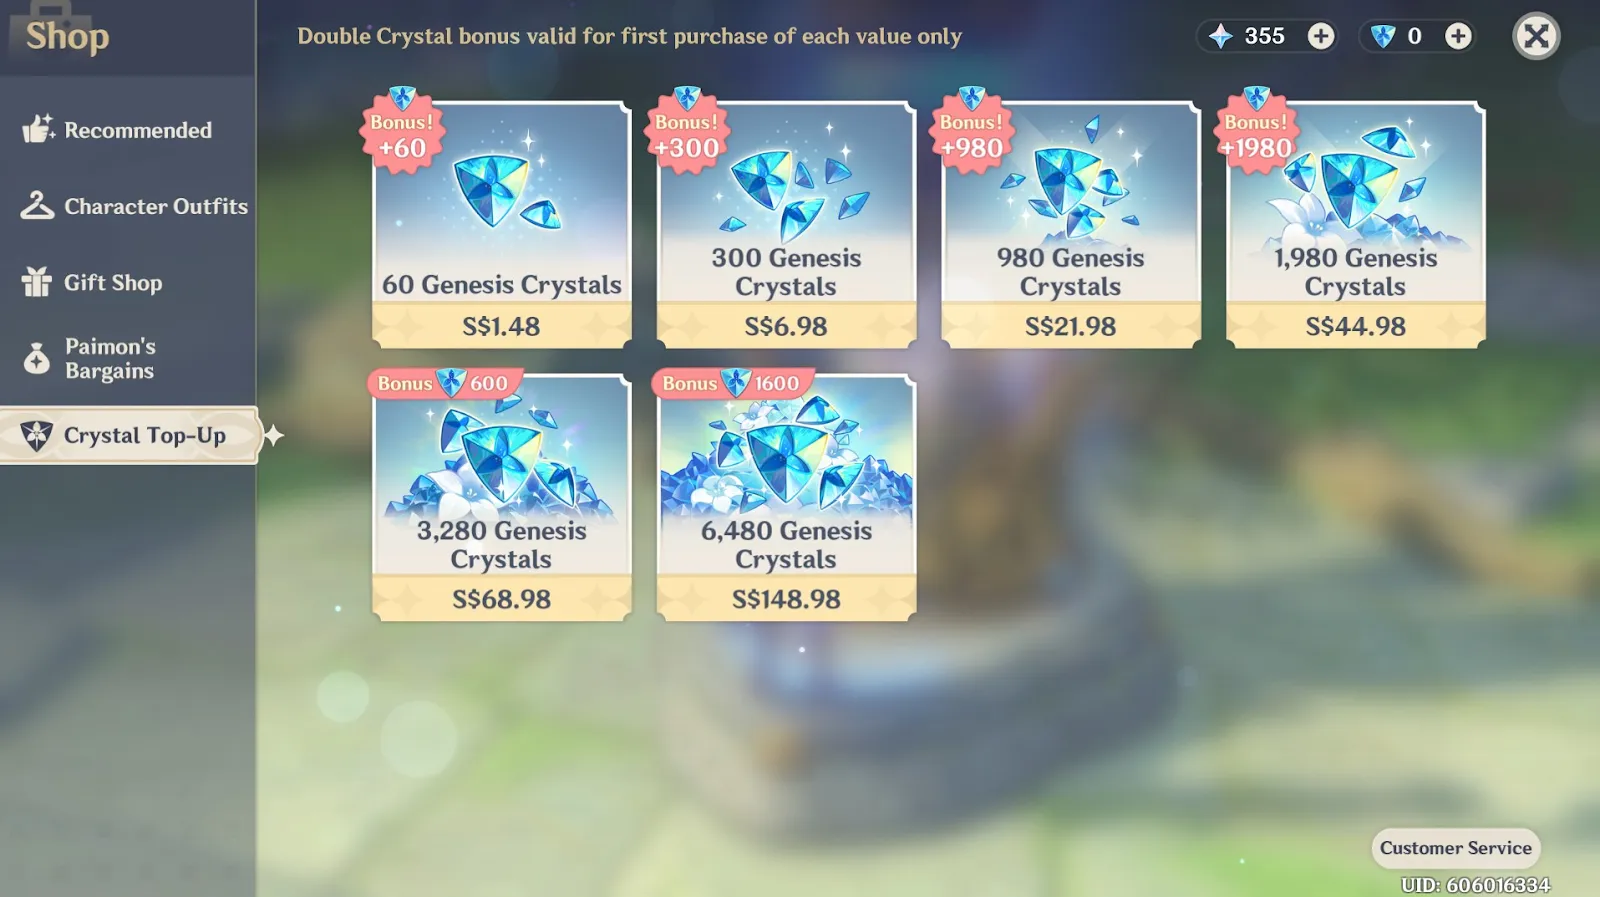 The more you invest in Genesis Crystal, the more you'll get as a bonus.